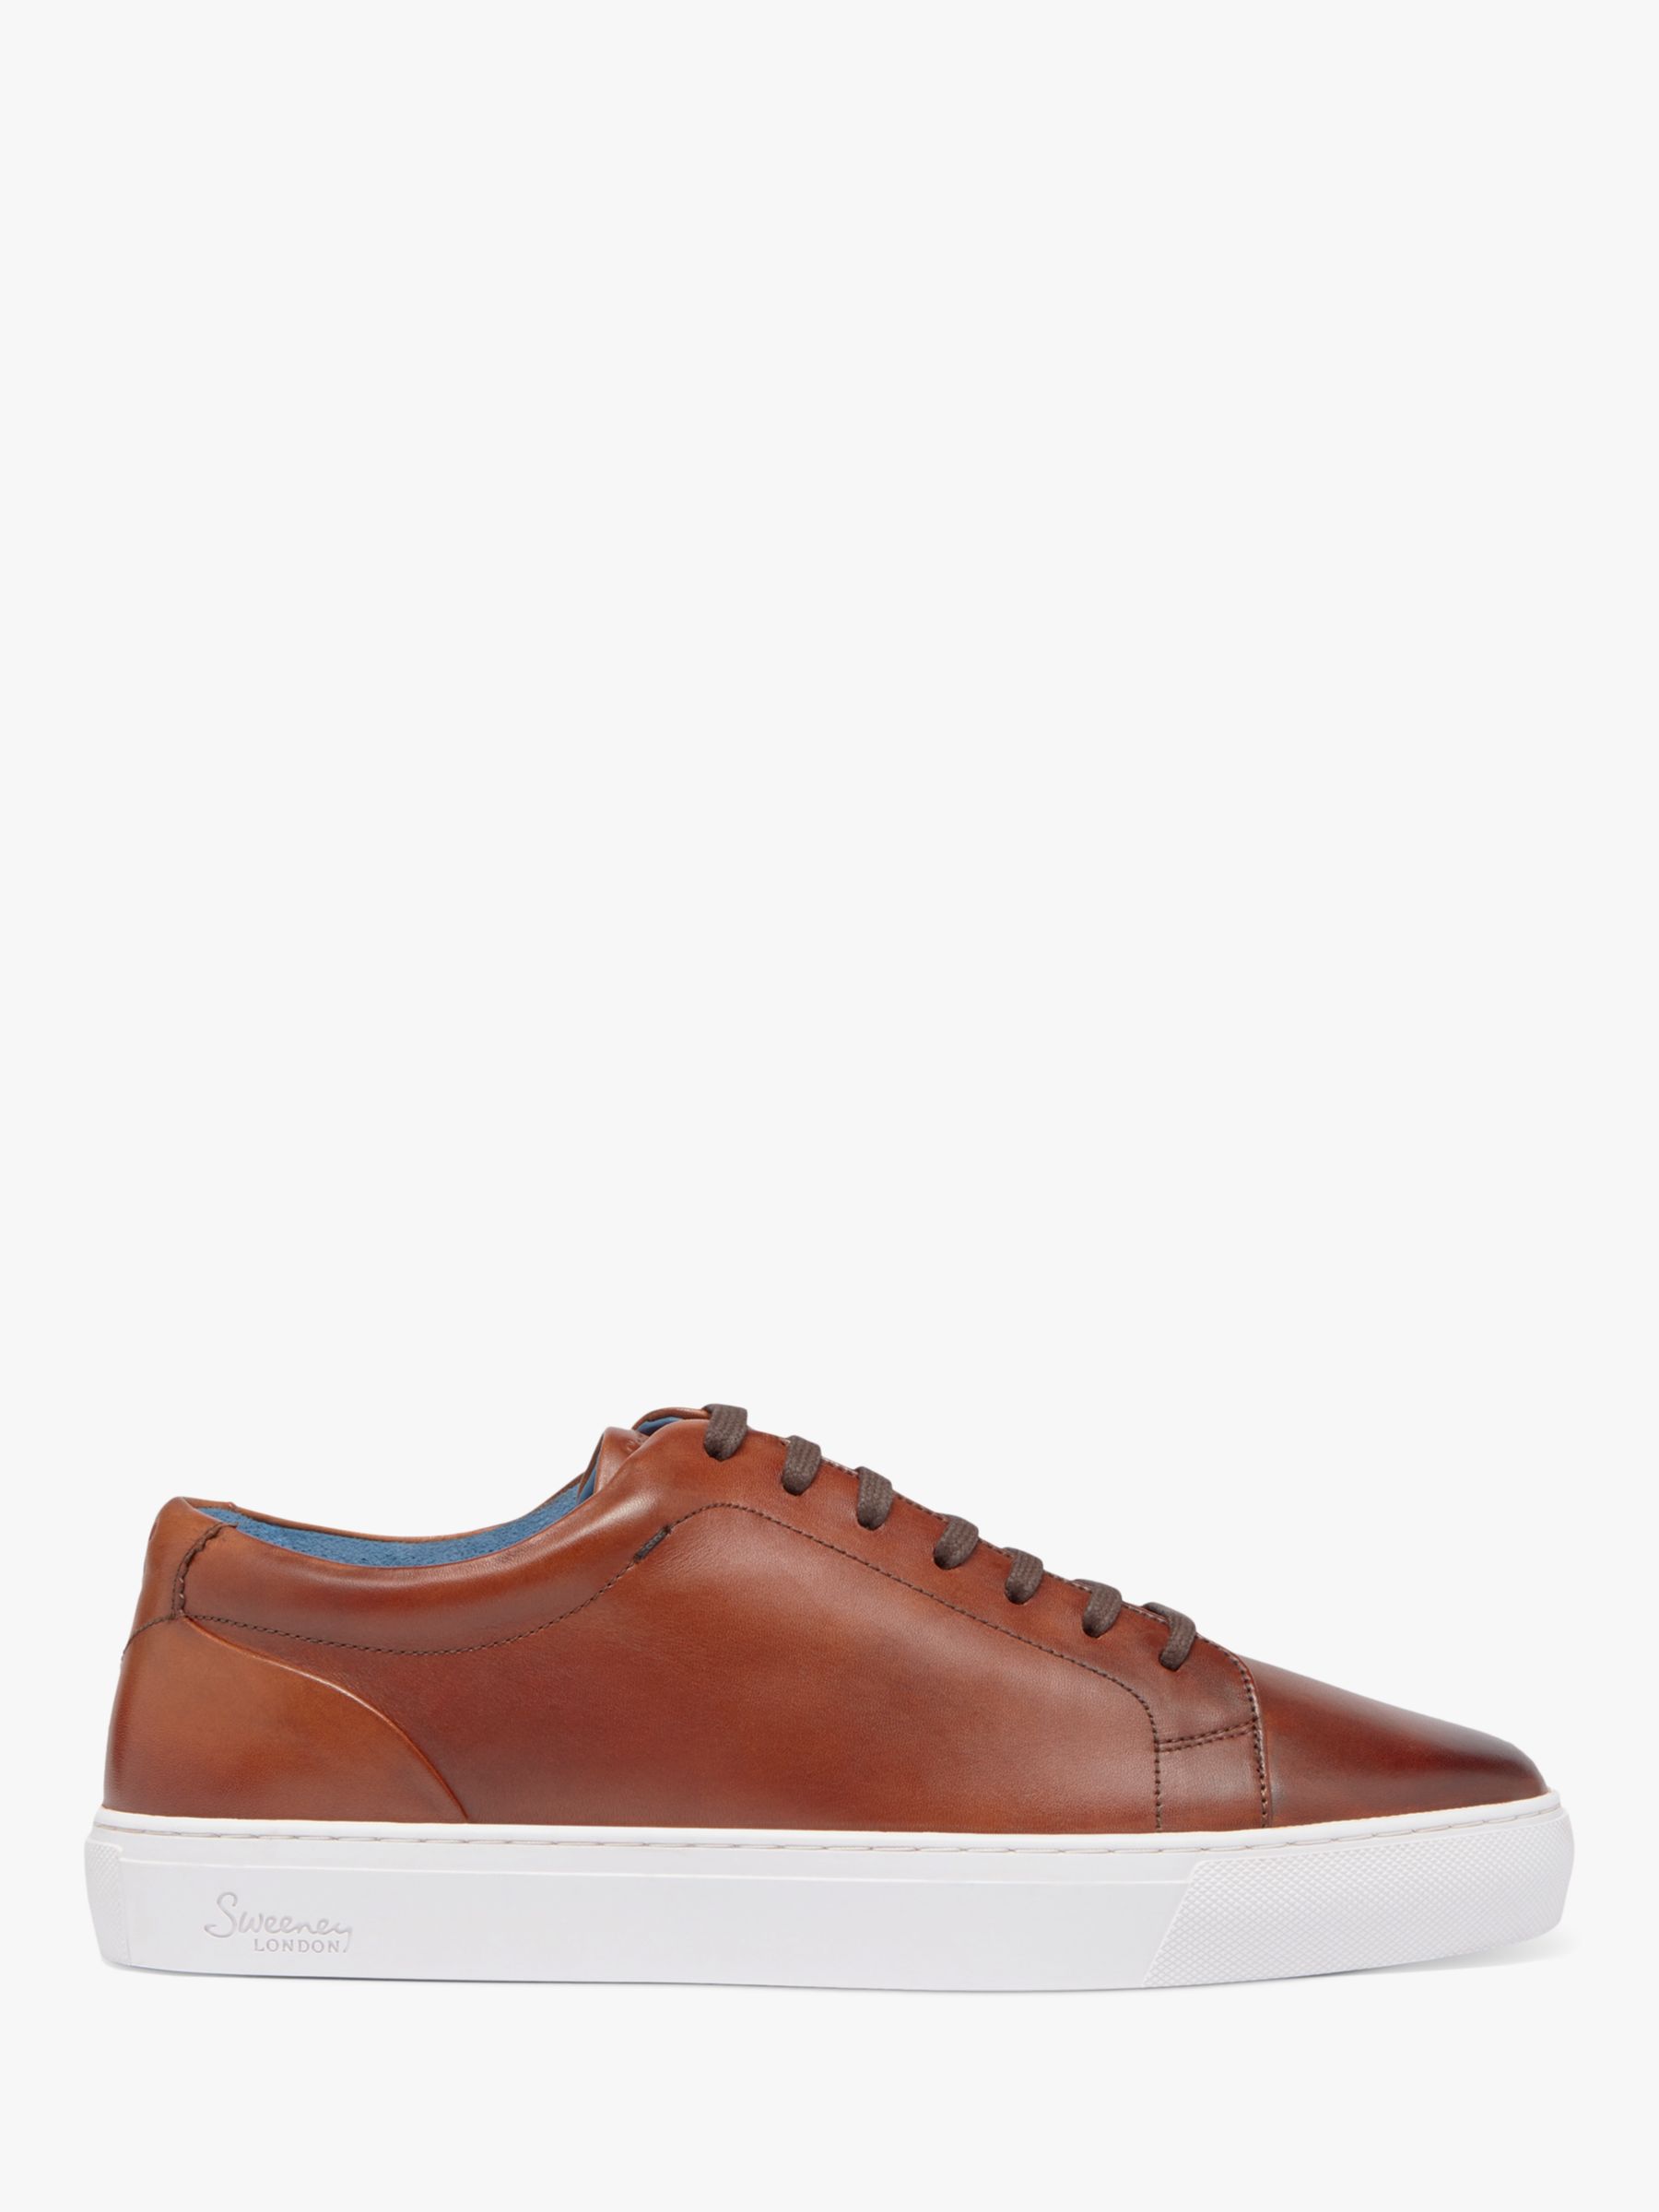 Oliver Sweeney Hayle Leather Trainers, Navy at John Lewis & Partners